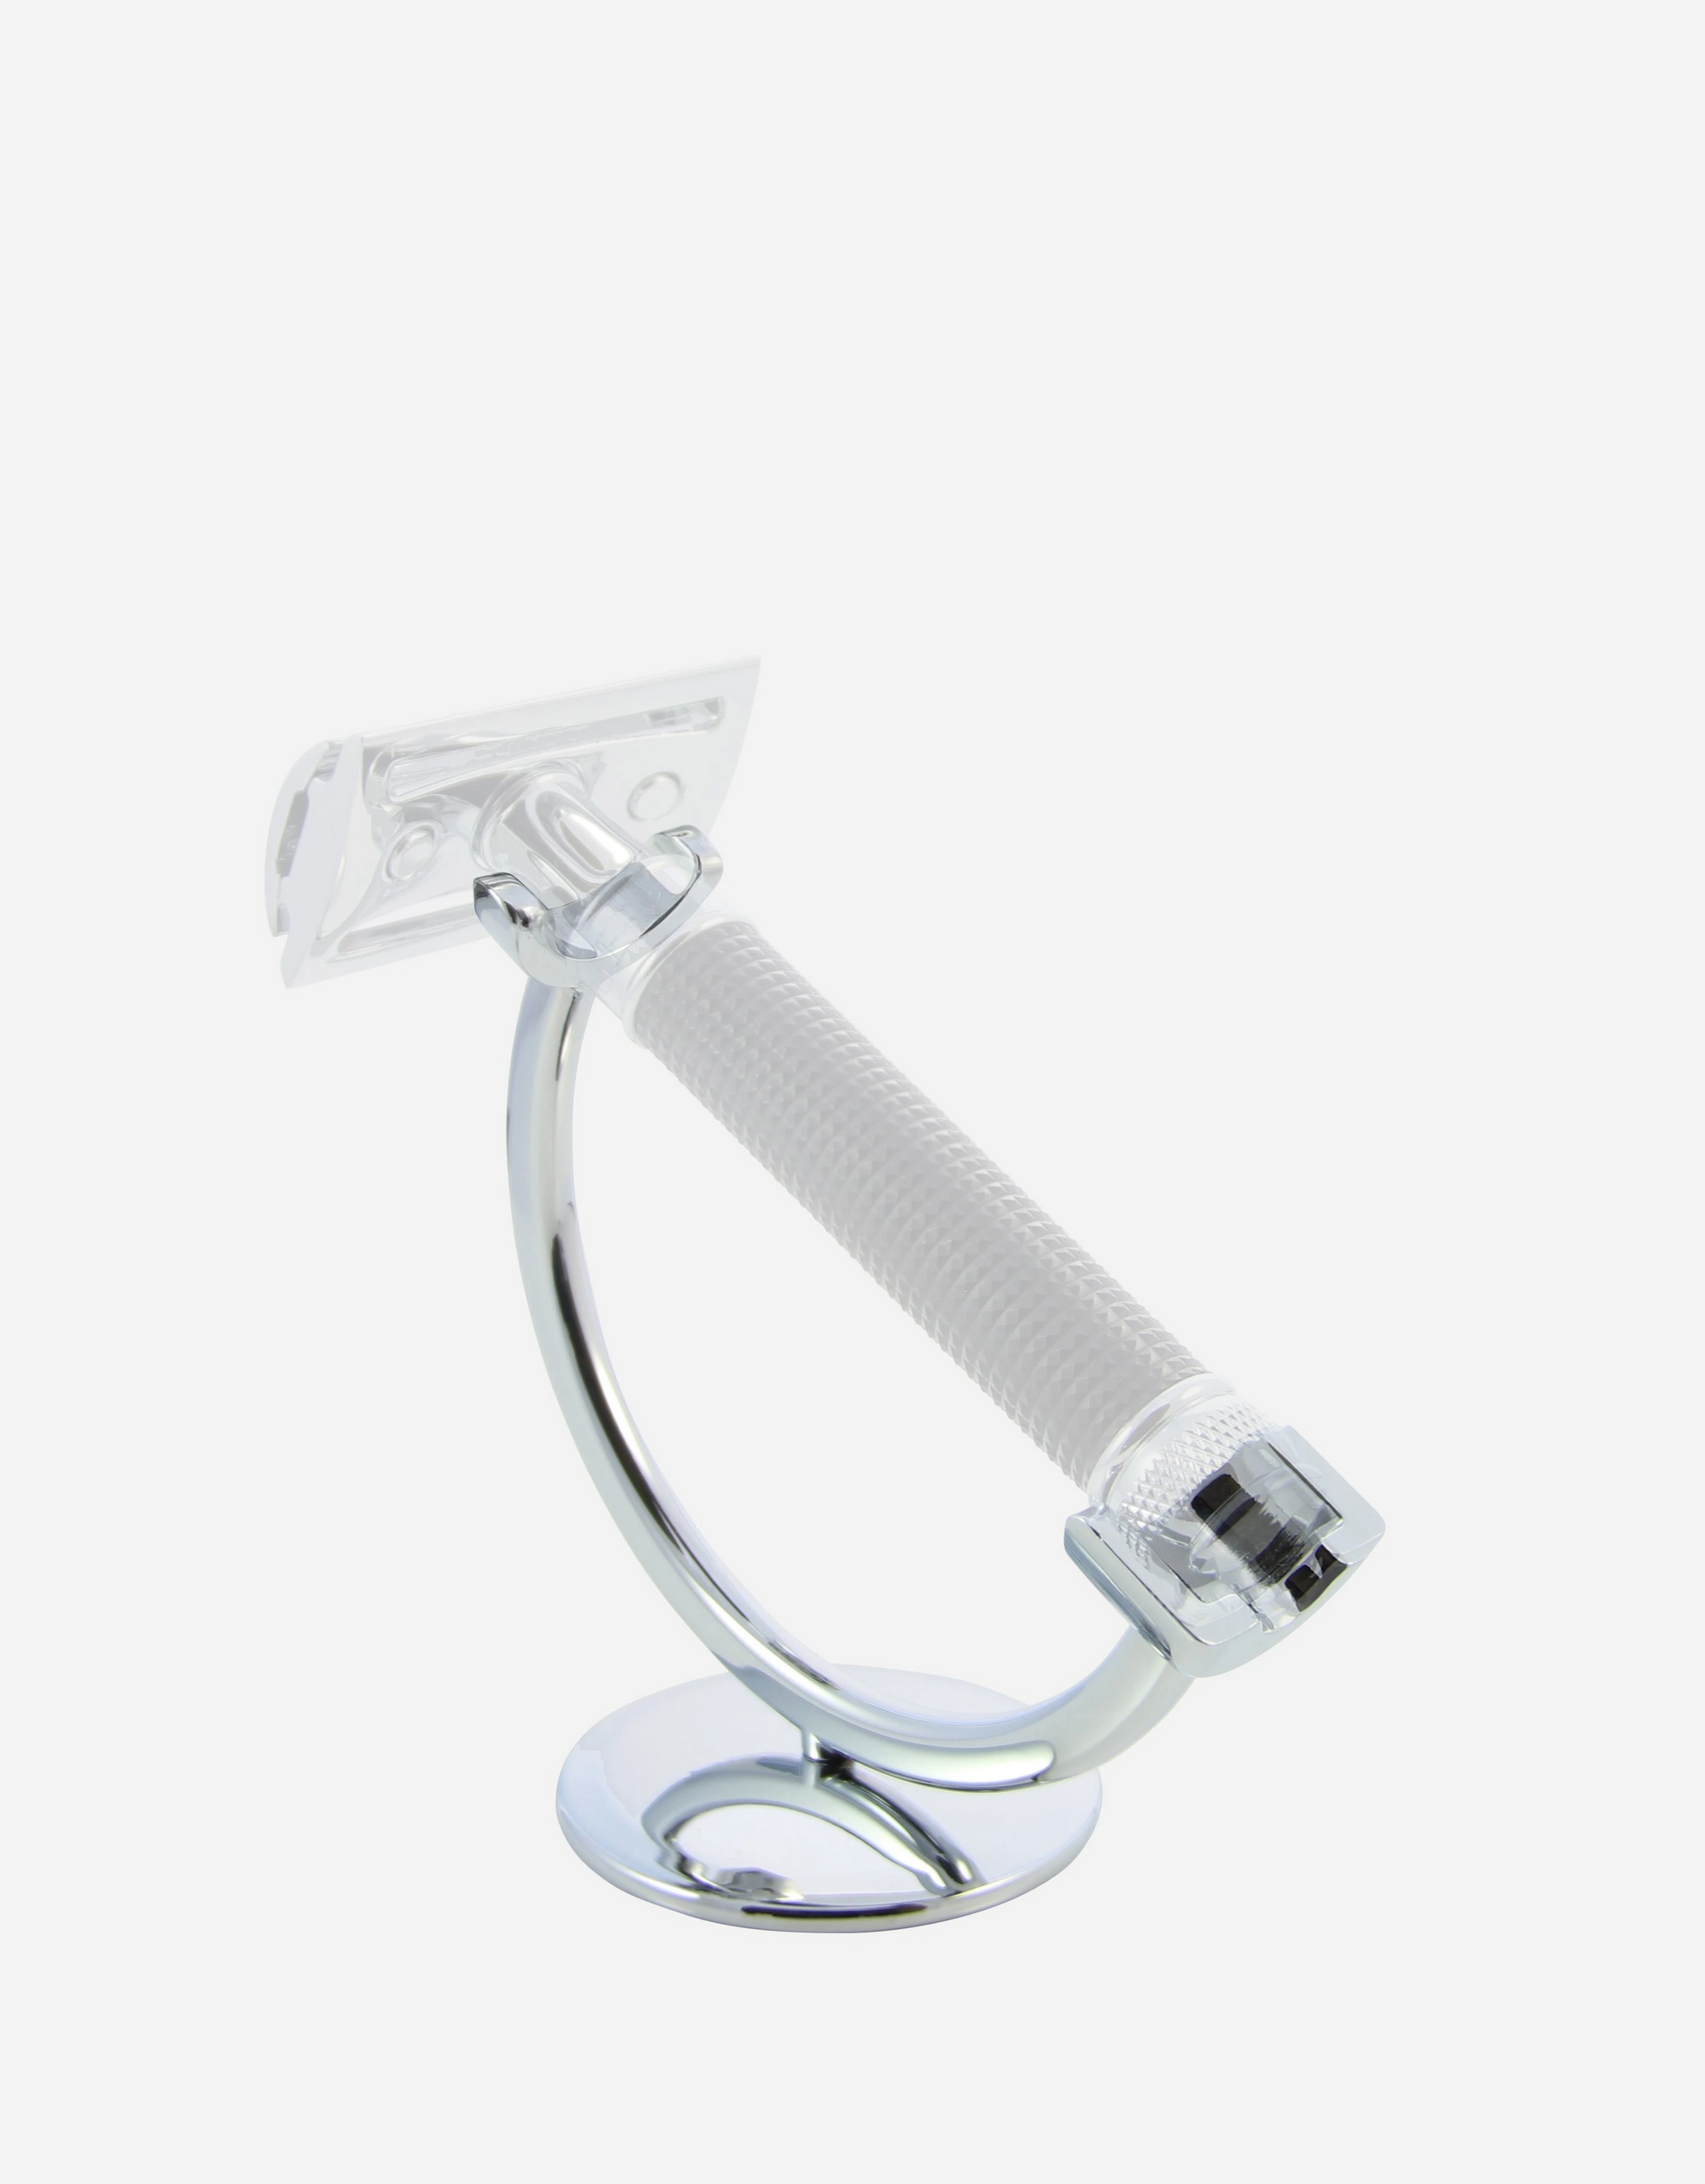 Edwin Jagger - Stand for Double Edge Safety Razor, Chrome Plated - The Panic Room